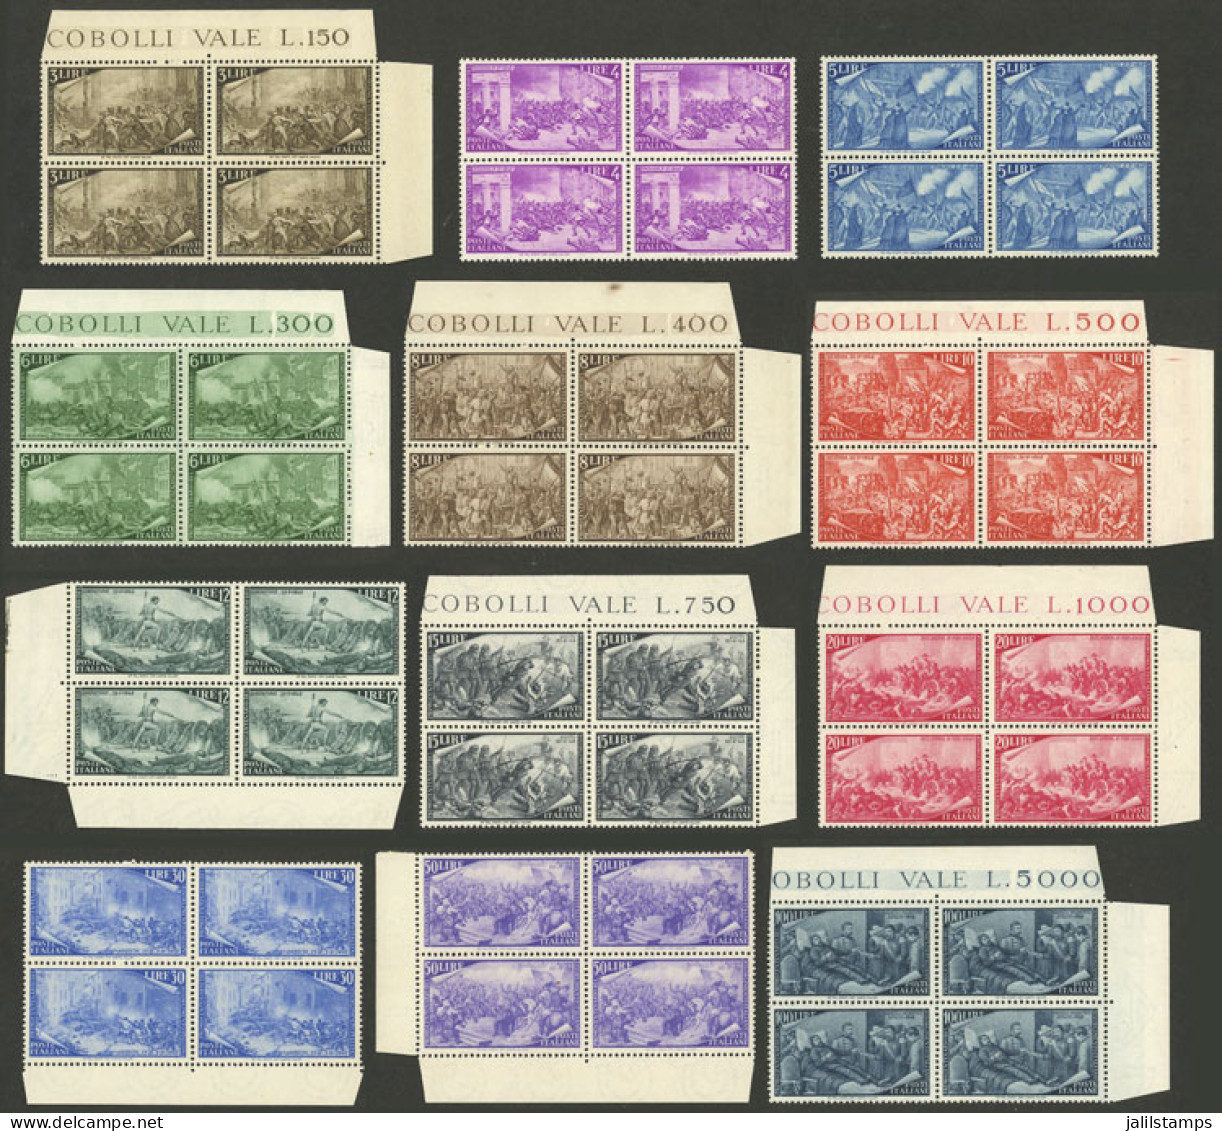 ITALY: Yvert 518/529, 1948 Risorgimento, Cmpl. Set Of 12 Values In MNH Blocks Of 4 Of Excellent Quality! - Unclassified